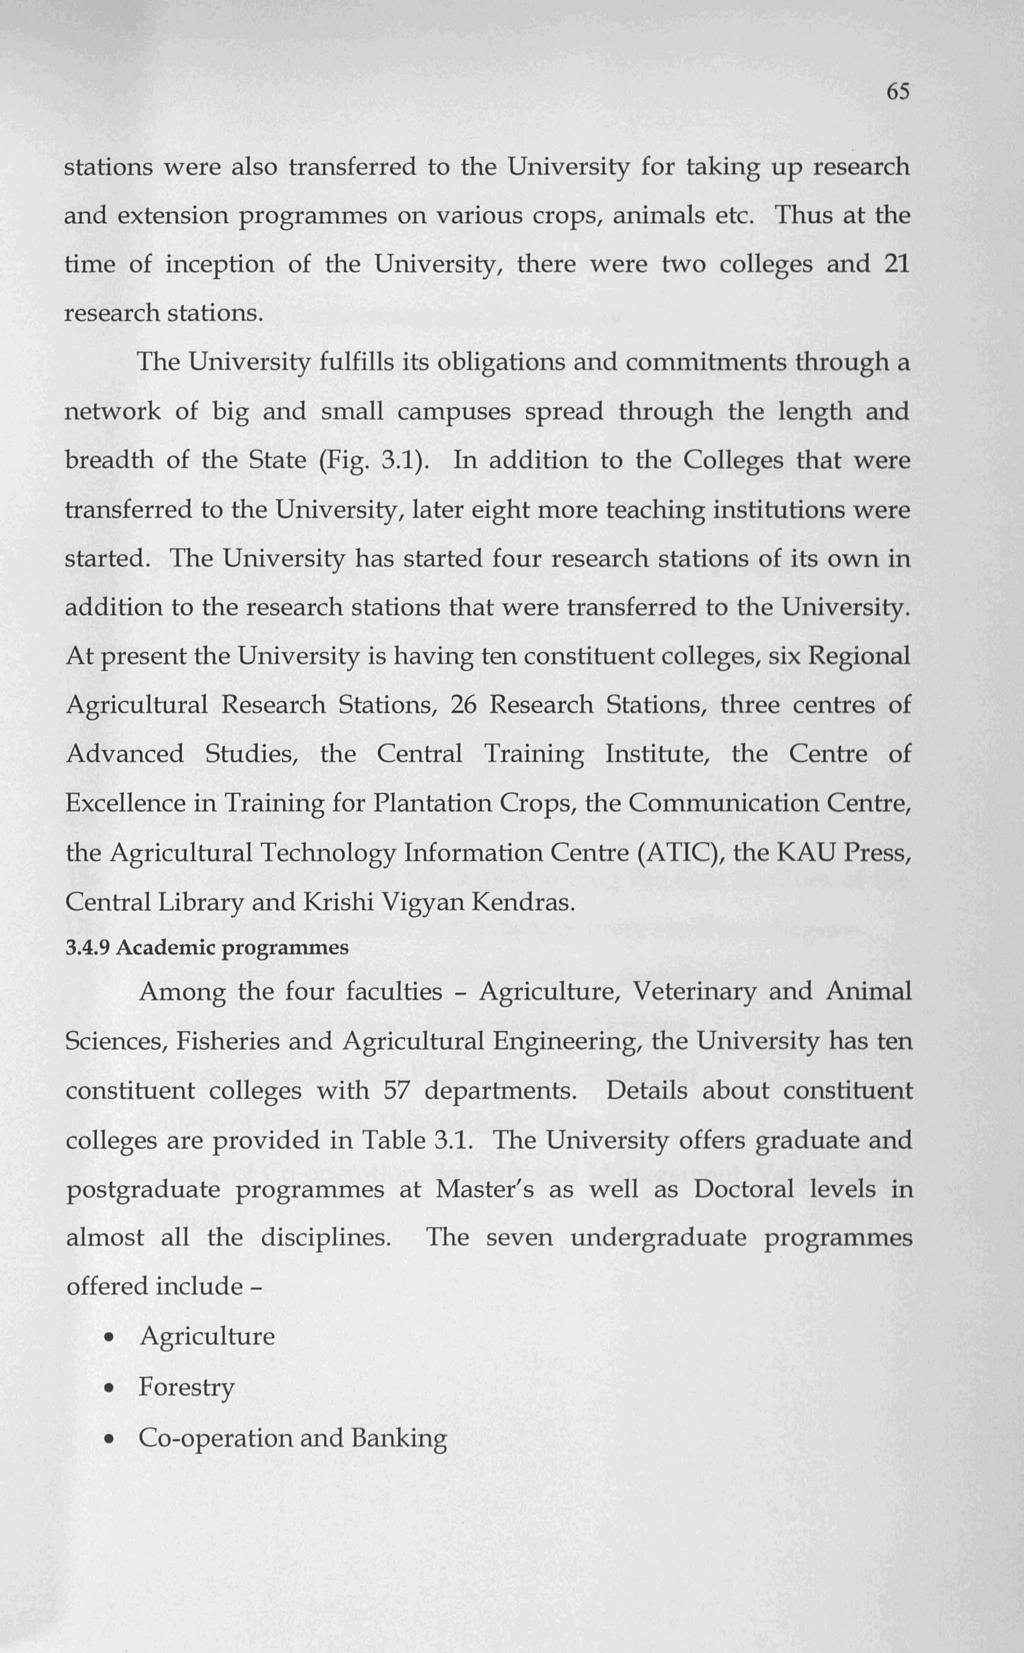 65 stations were also transferred to the University for taking up research and extension programmes on various crops, animals etc.